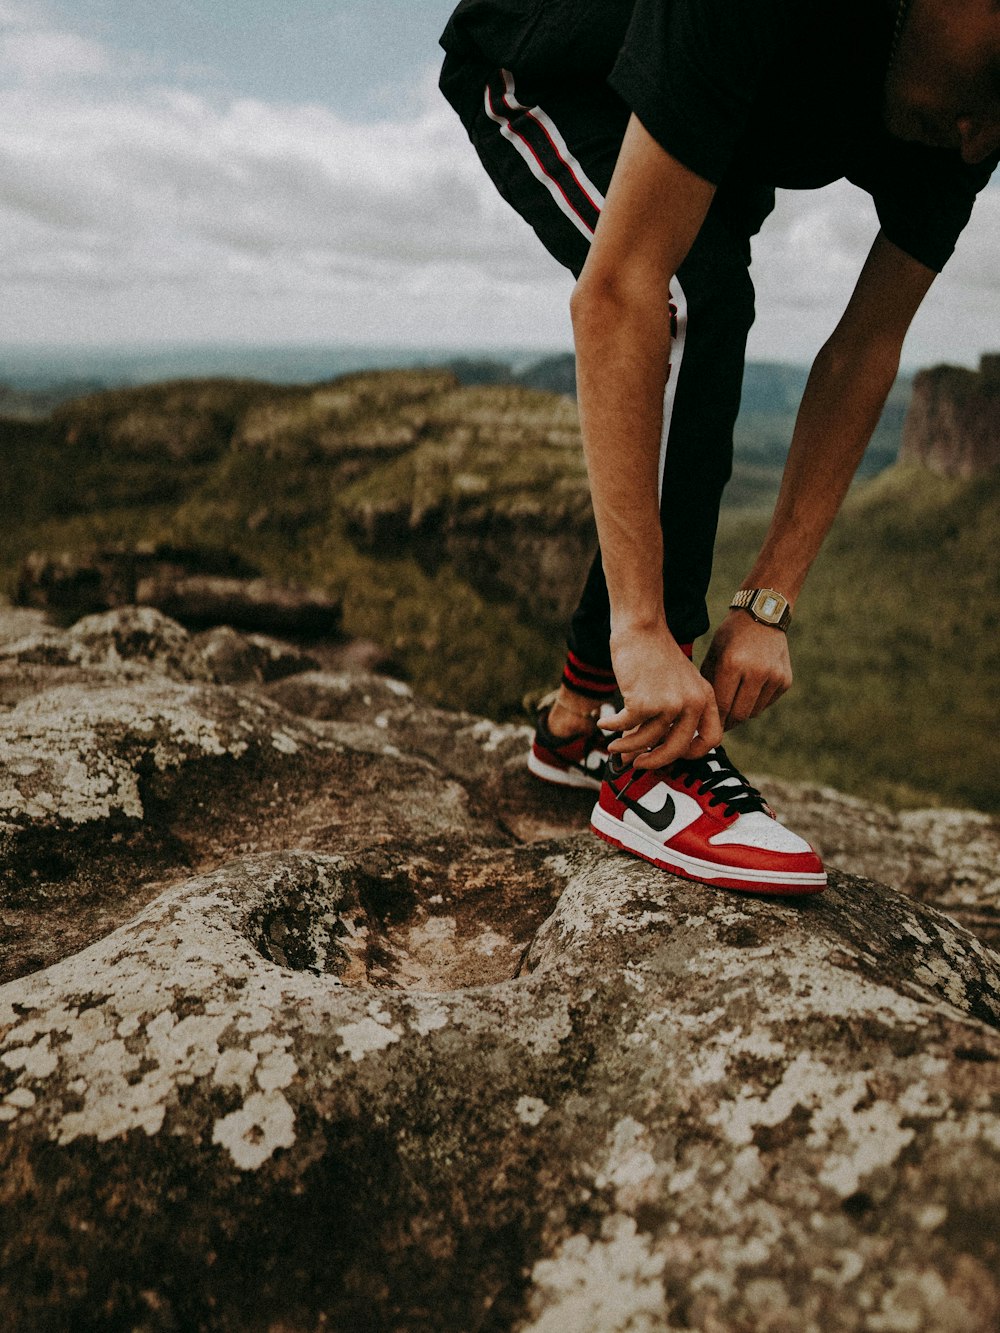 person in black shorts and red nike sneakers standing on rocky ground during daytime